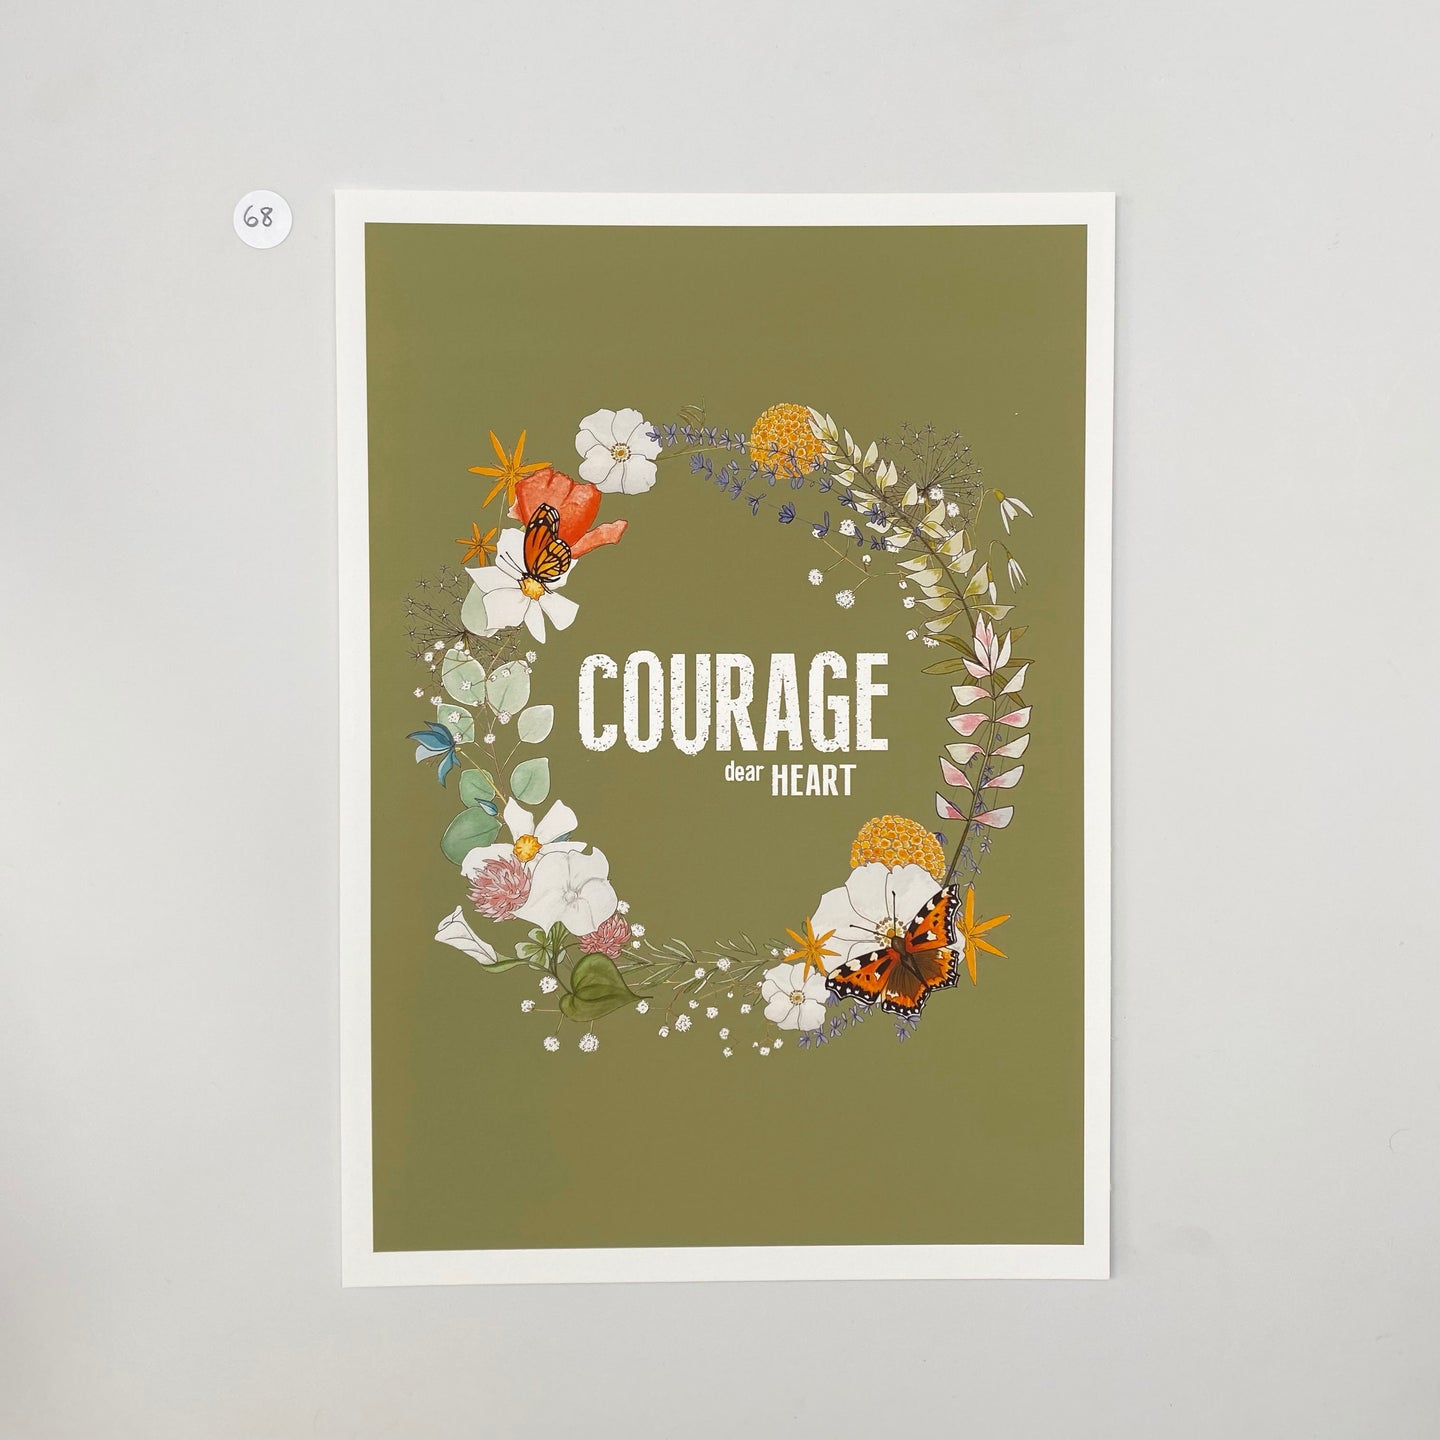 Outlet 68: Courage dear Heart - A4